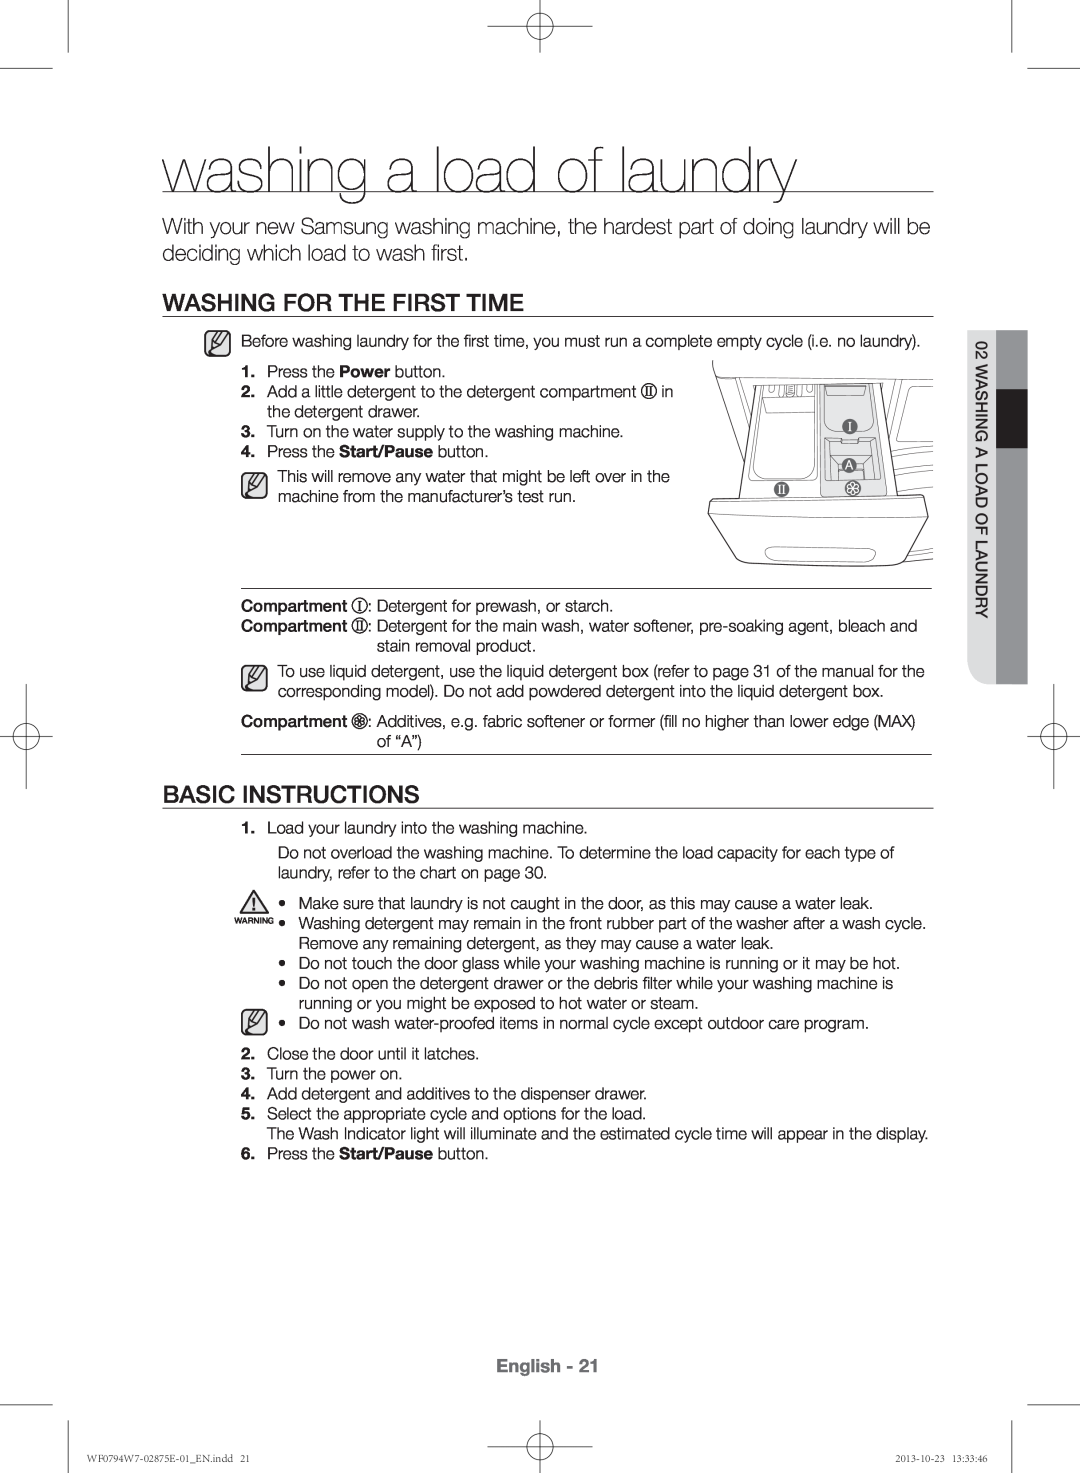 Samsung WF0794W7E9/XSV manual washing a load of laundry, Washing for the first time, Basic instructions, English 